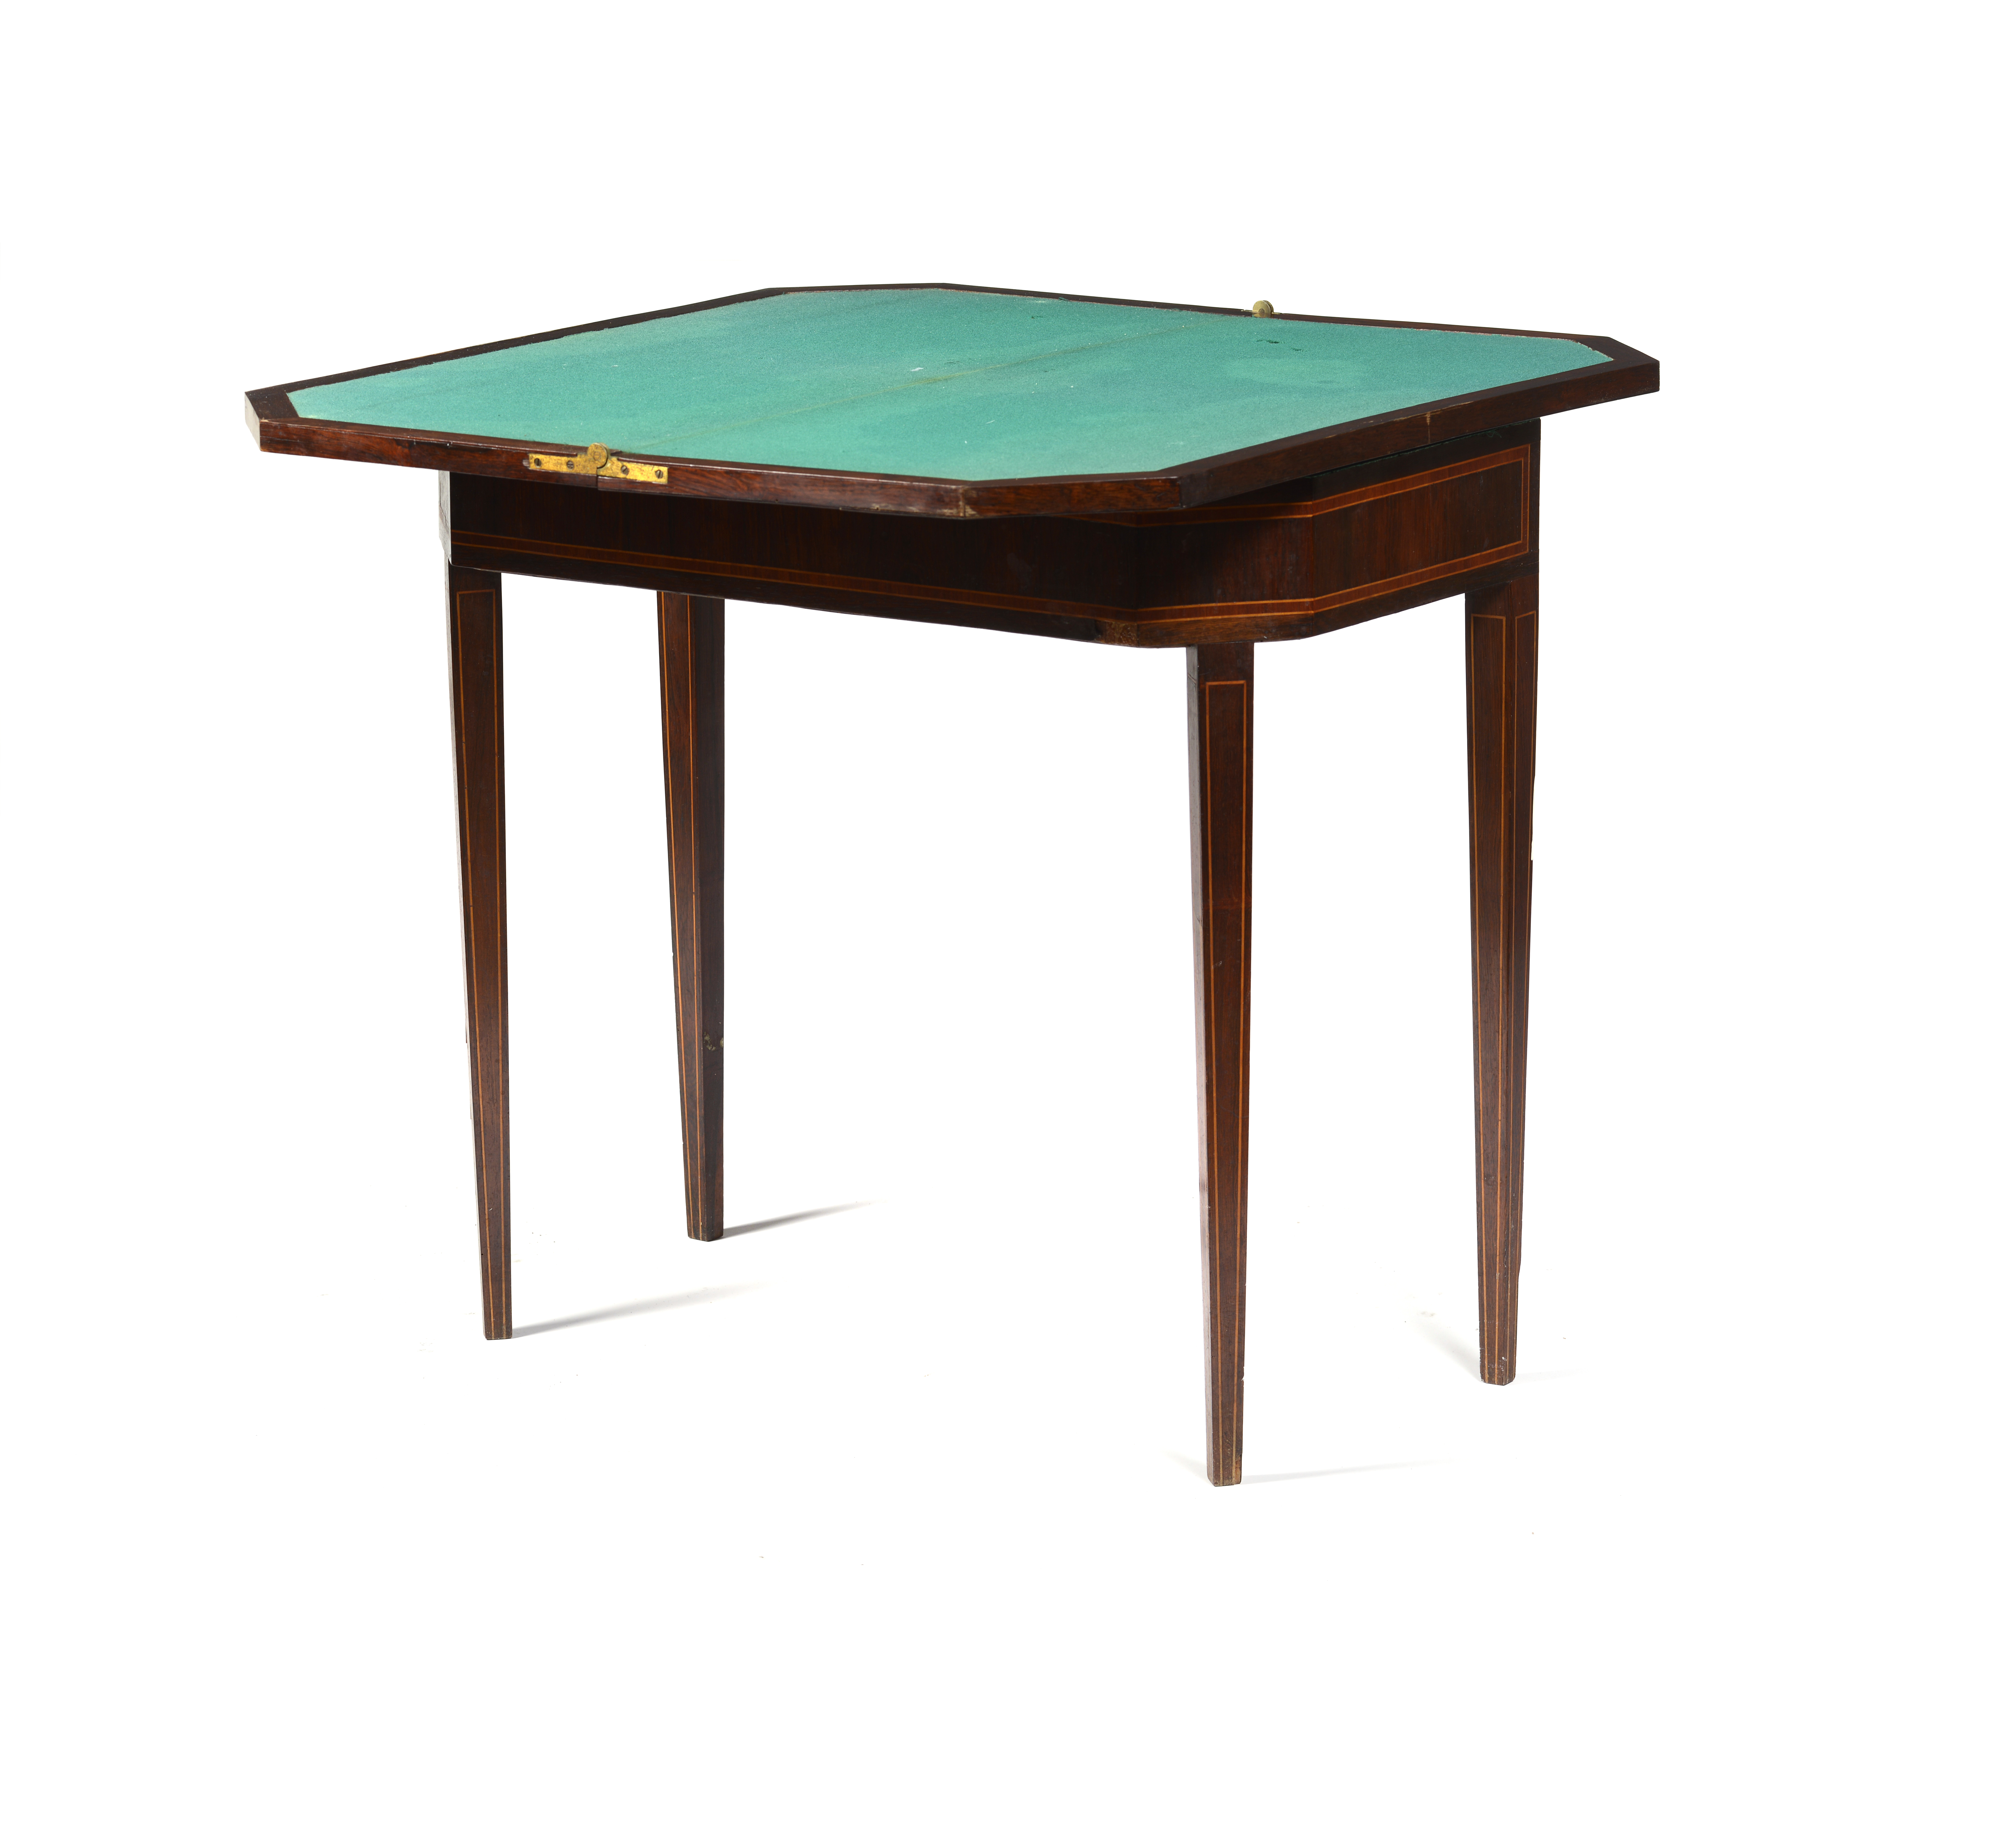 A D.Maria card table - Image 2 of 2